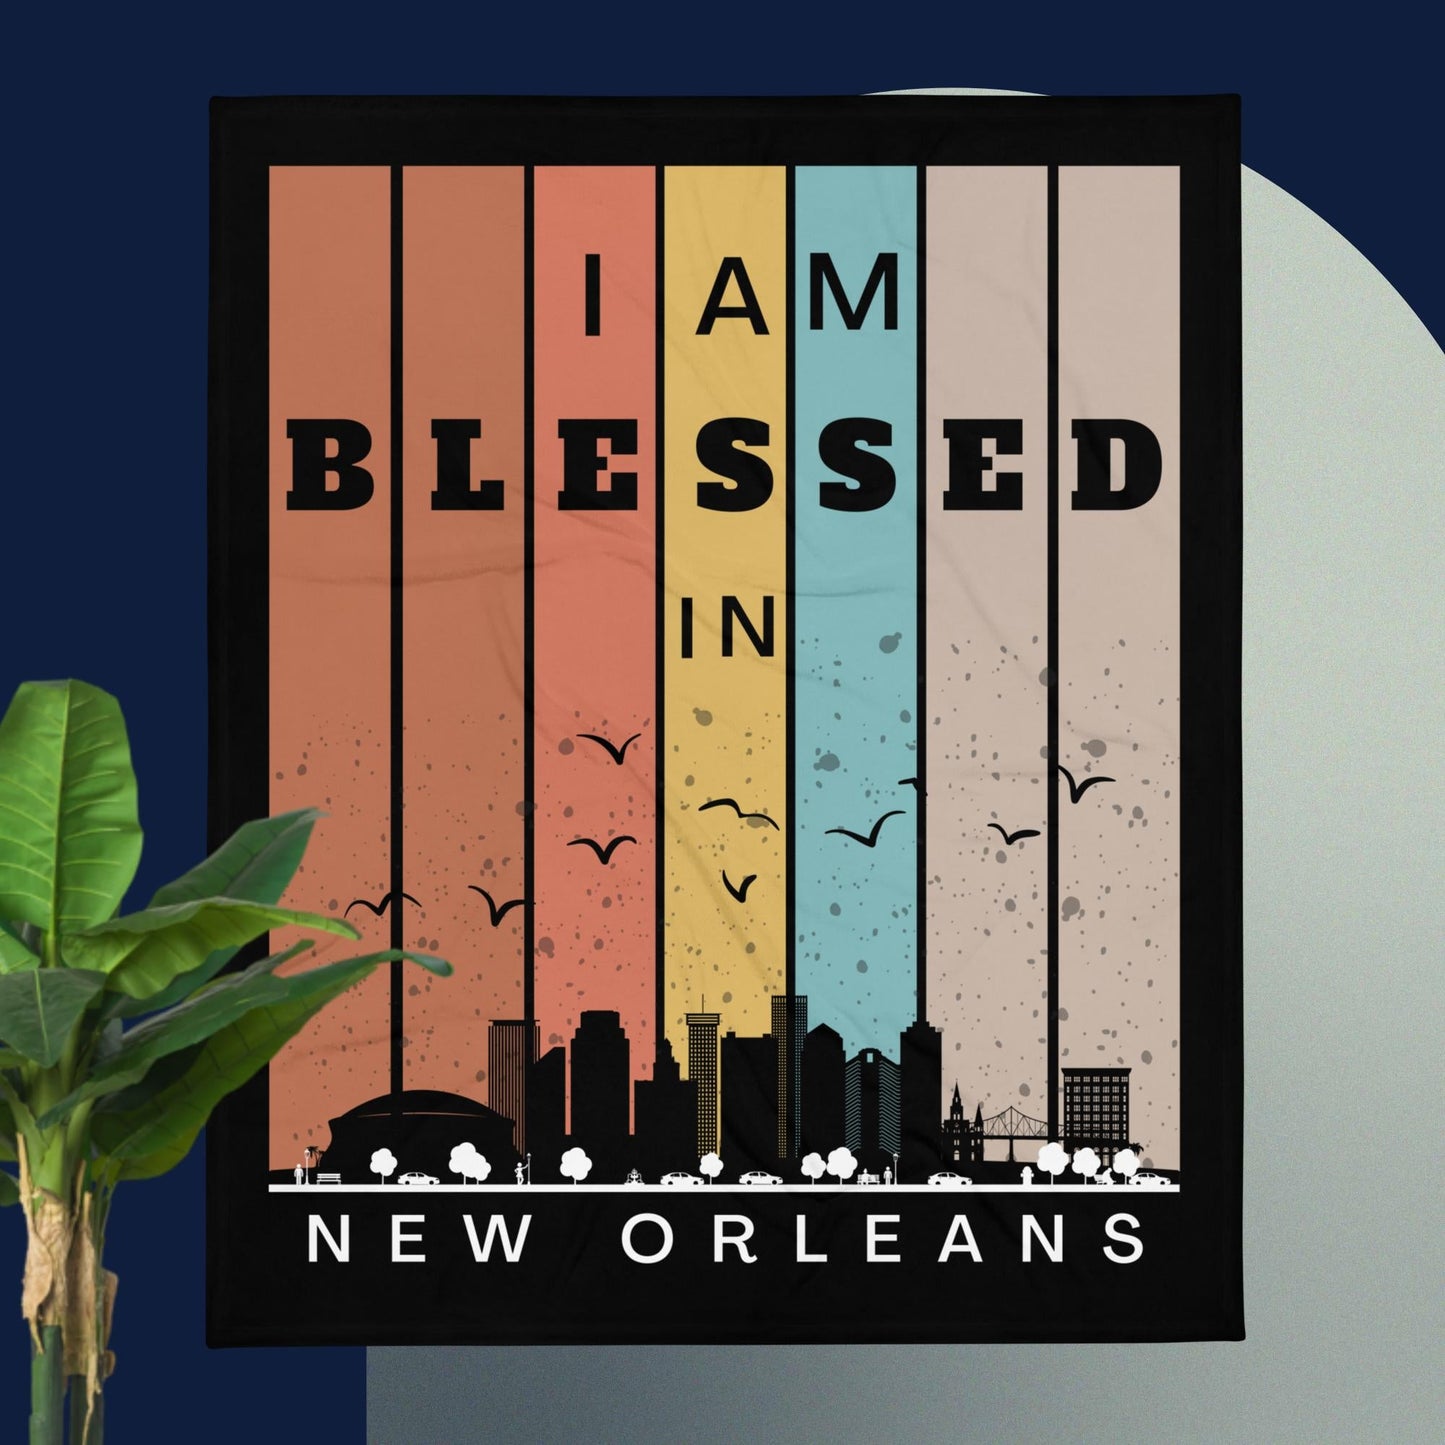 Southeast Retro I AM Blessed City Skylines Throw Blankets-THROW BLANKET-50″×60″-New Orleans-mysticalcherry